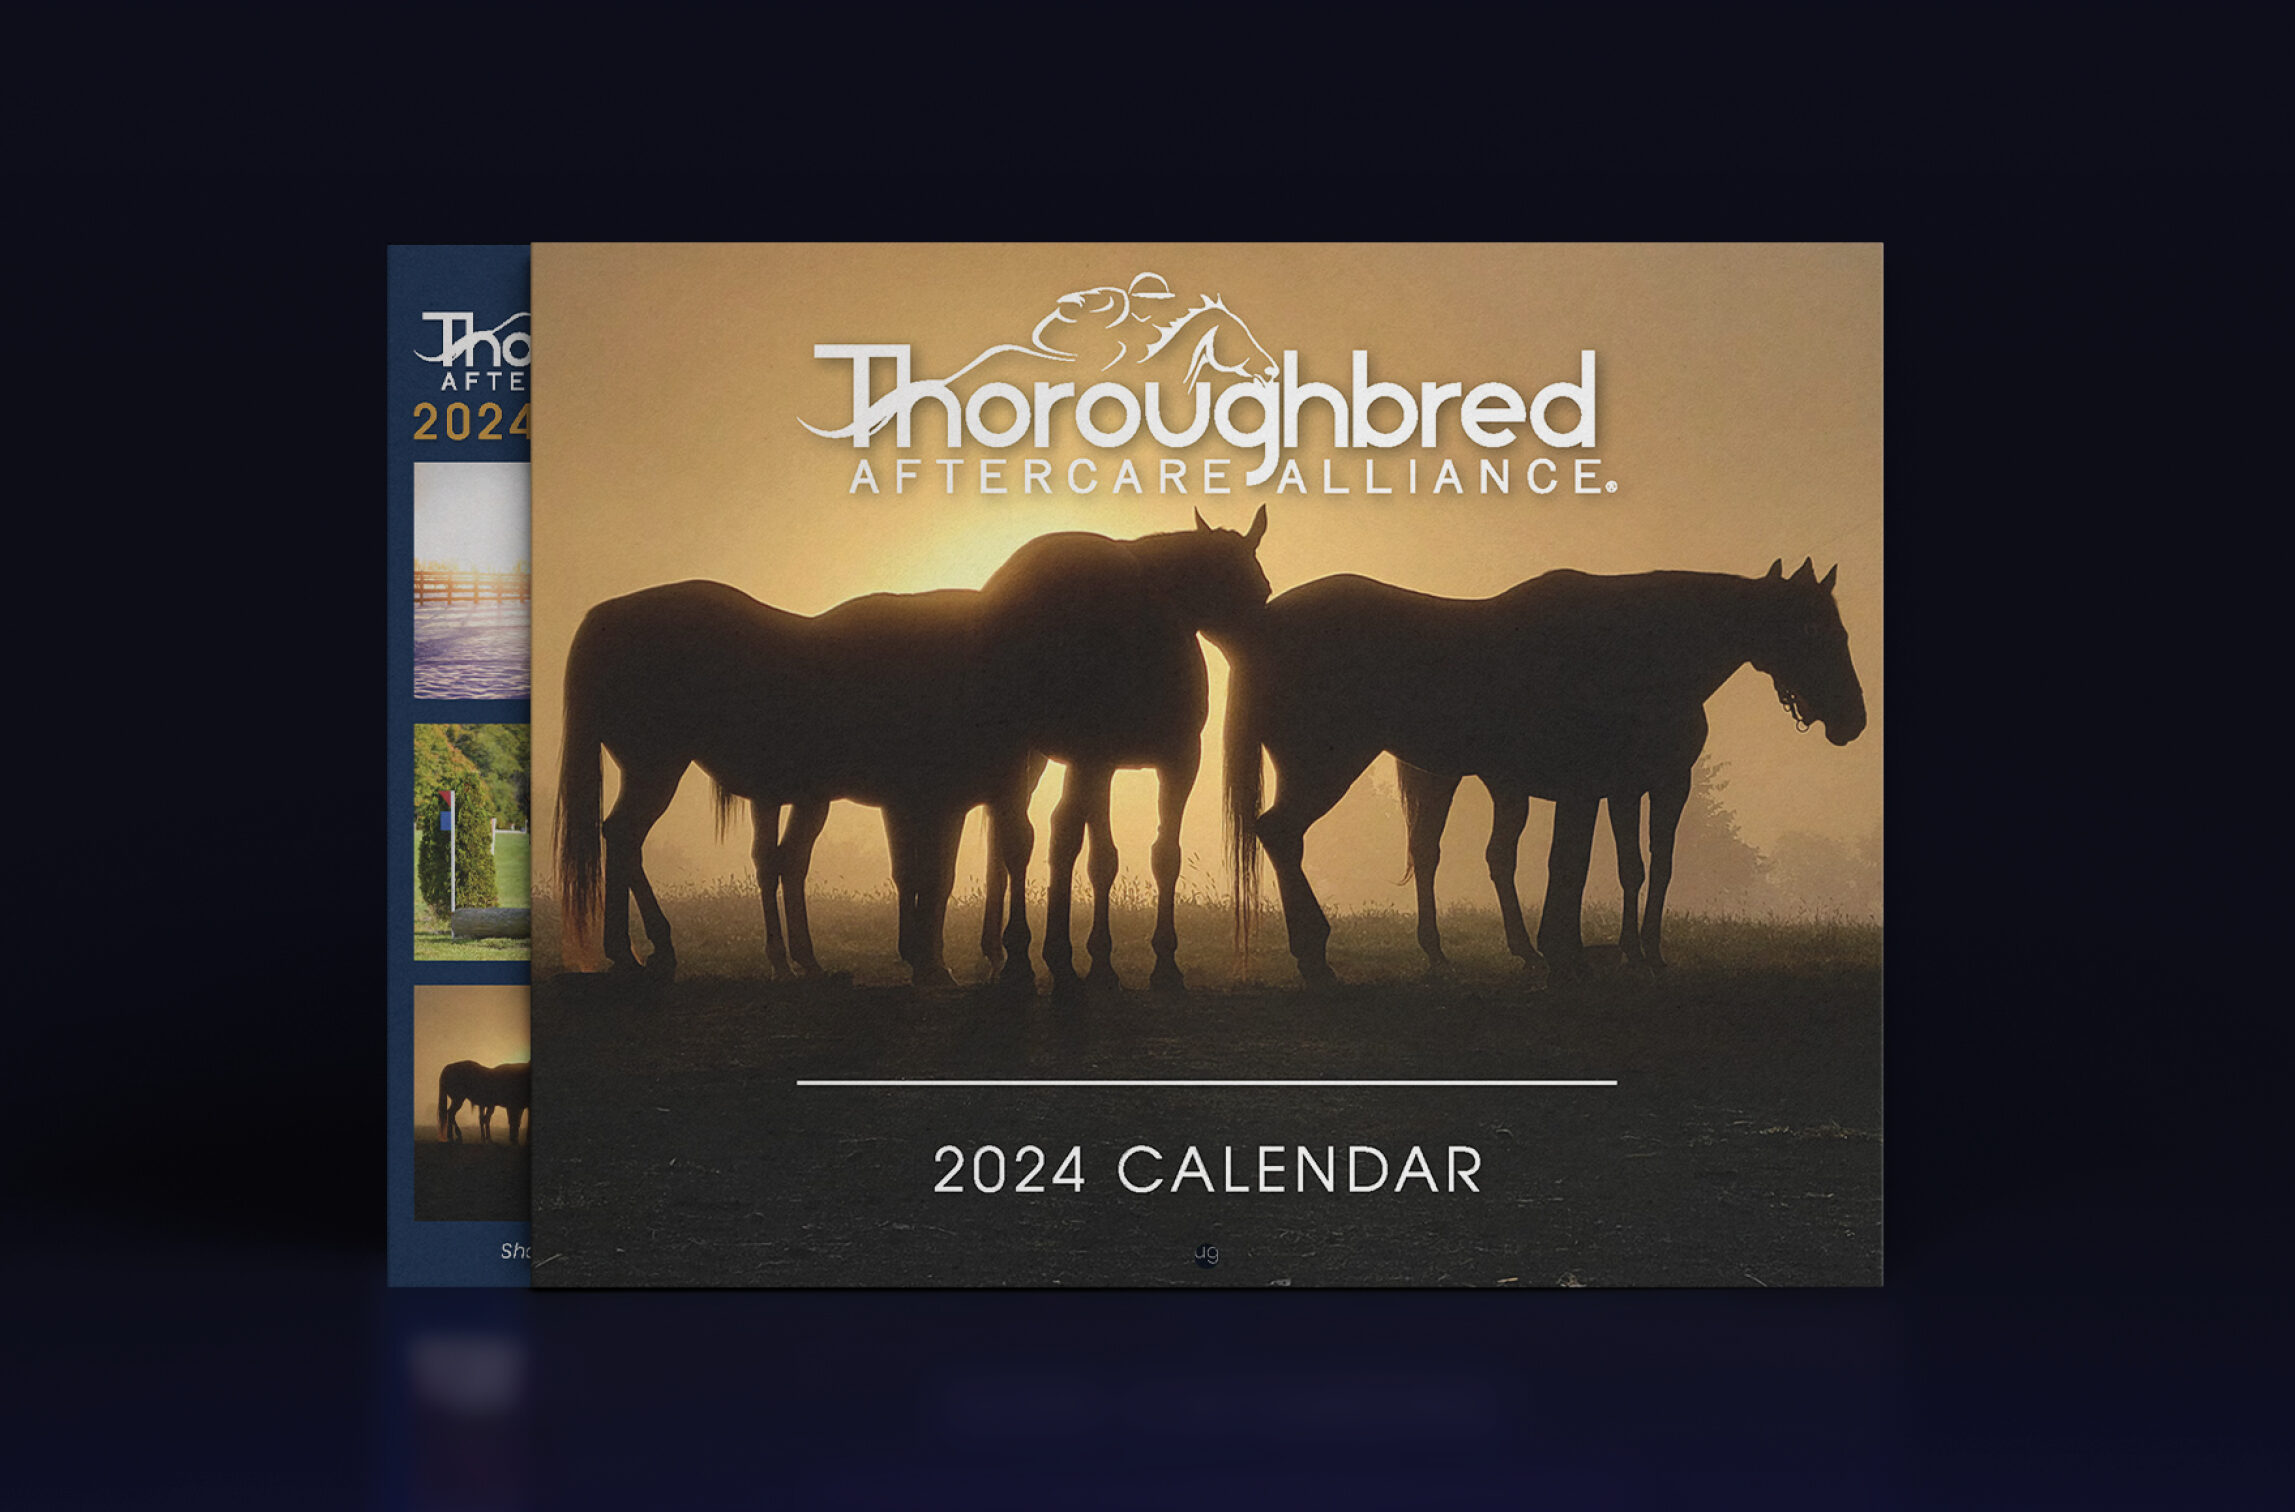 Thoroughbred Aftercare Alliance Announces Third Annual Calendar Photo Contest Winners